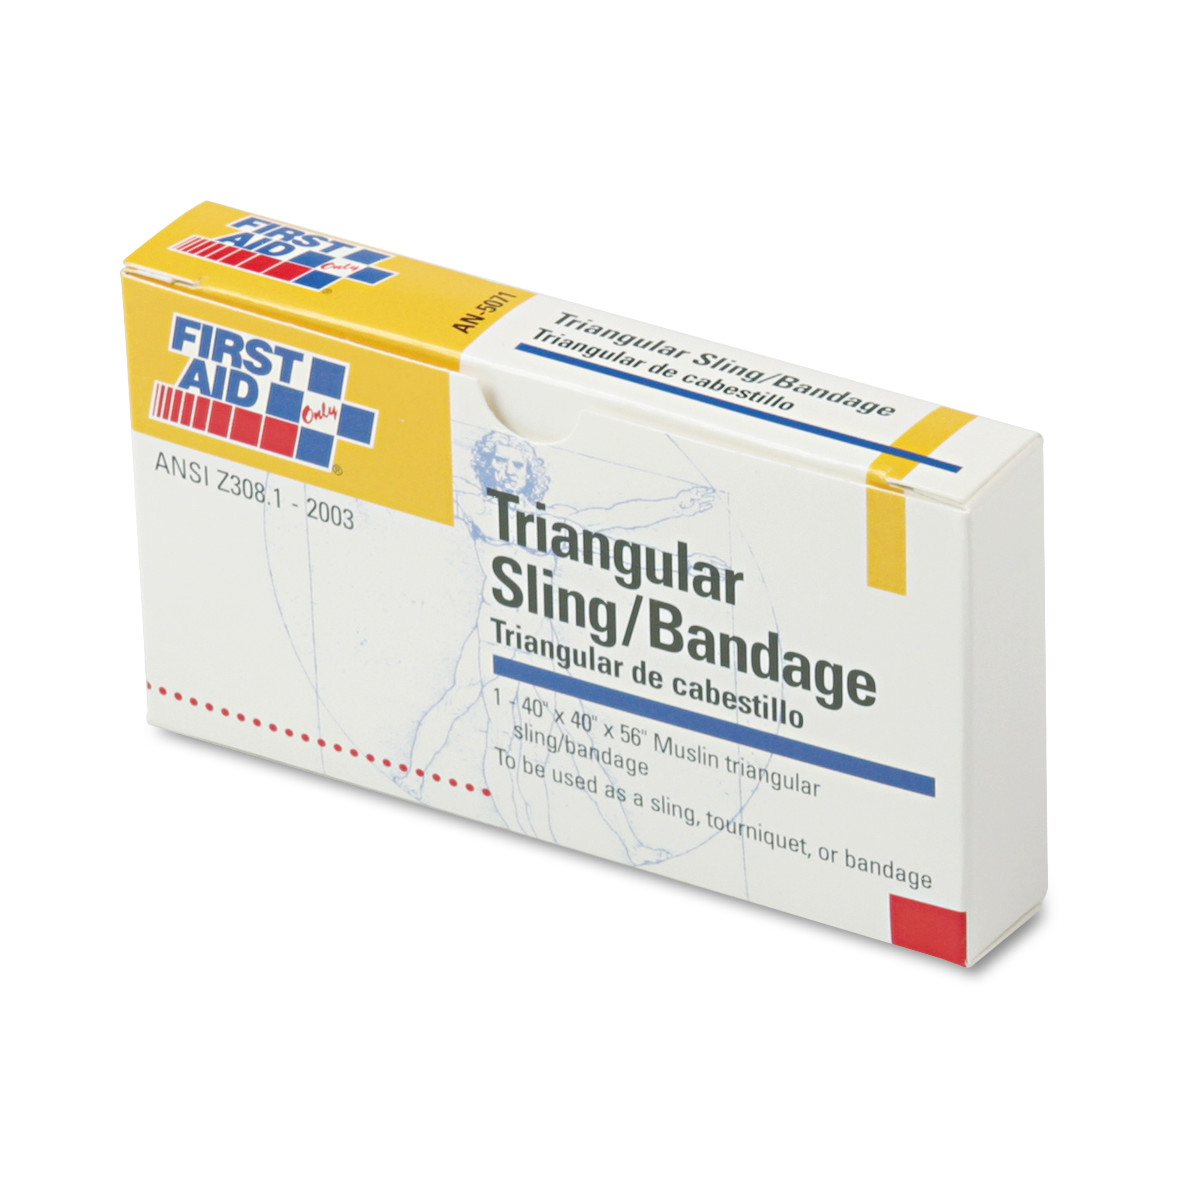 First-Aid Refill Sling/Tourniquet Triangular Bandages, 40" x 40" x 56", 10/Pack